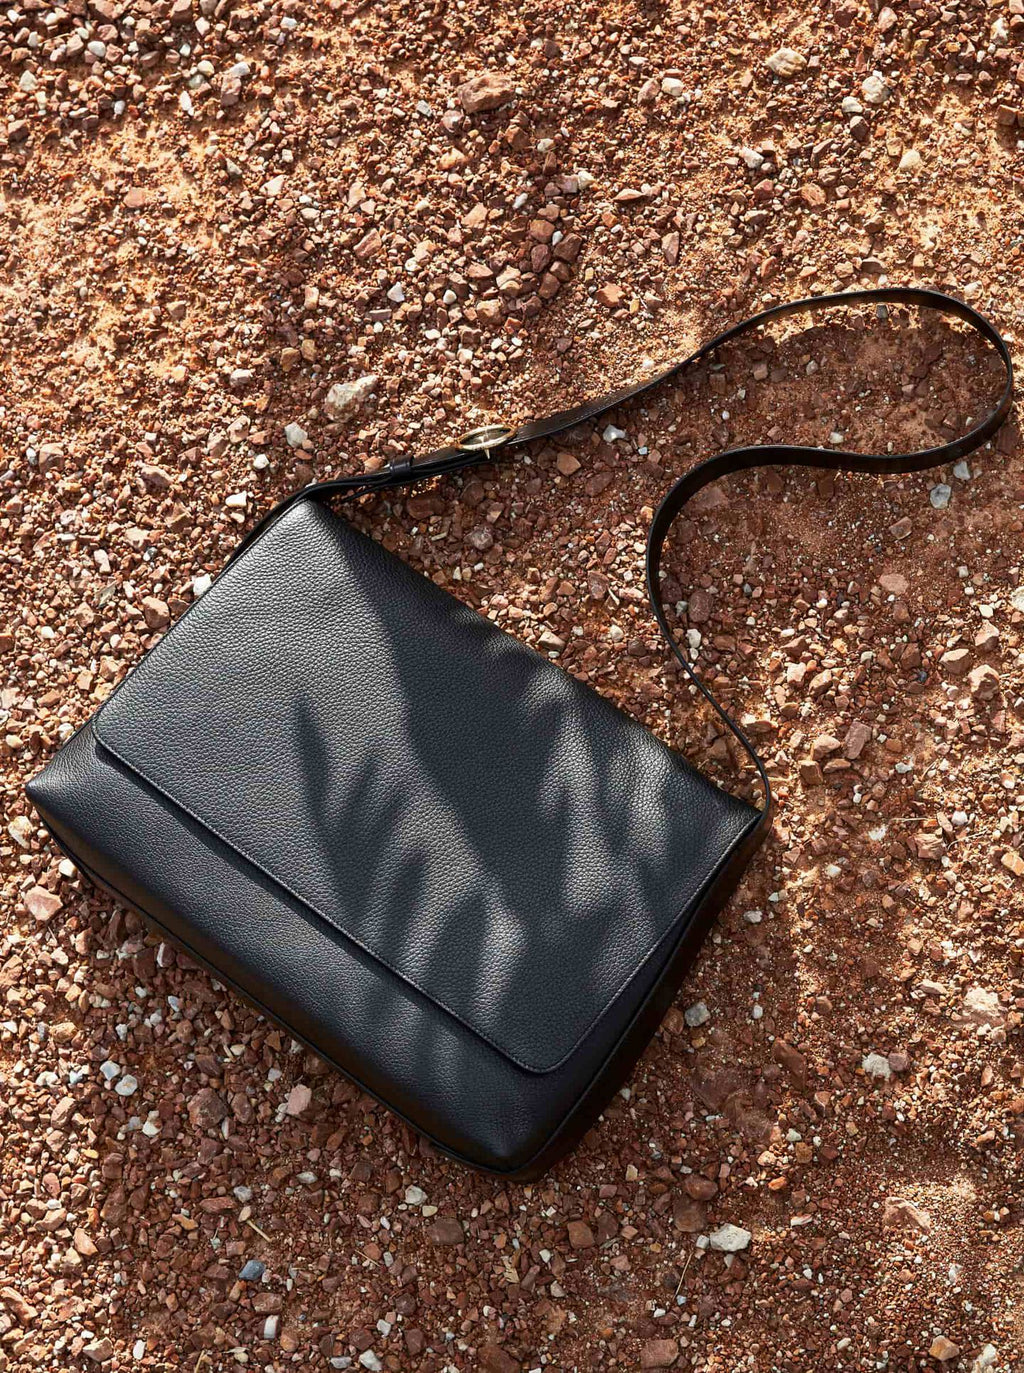 Purse with a strap lying on a textured ground.